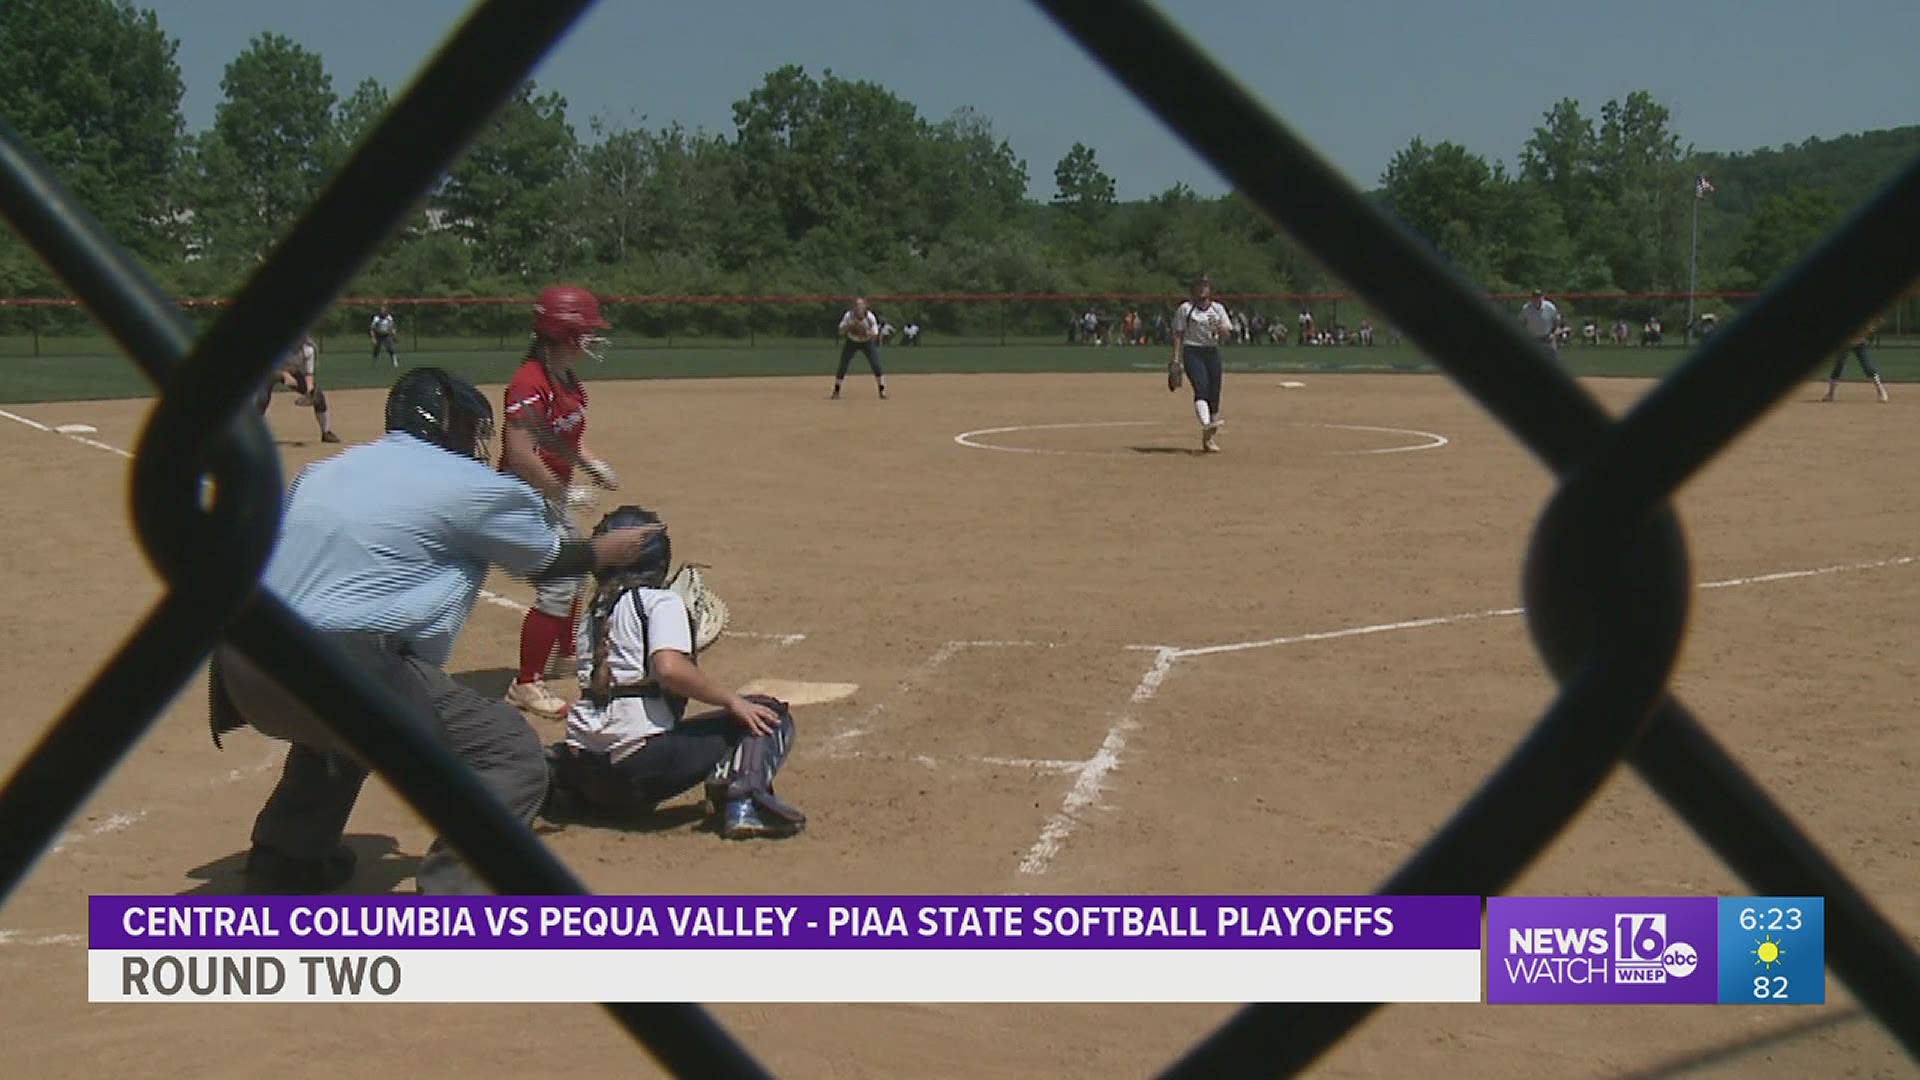 Central Columbia, behind pitcher, Mea Consentino blanked Pequea Valley 3-0 in the State softball playoffs.